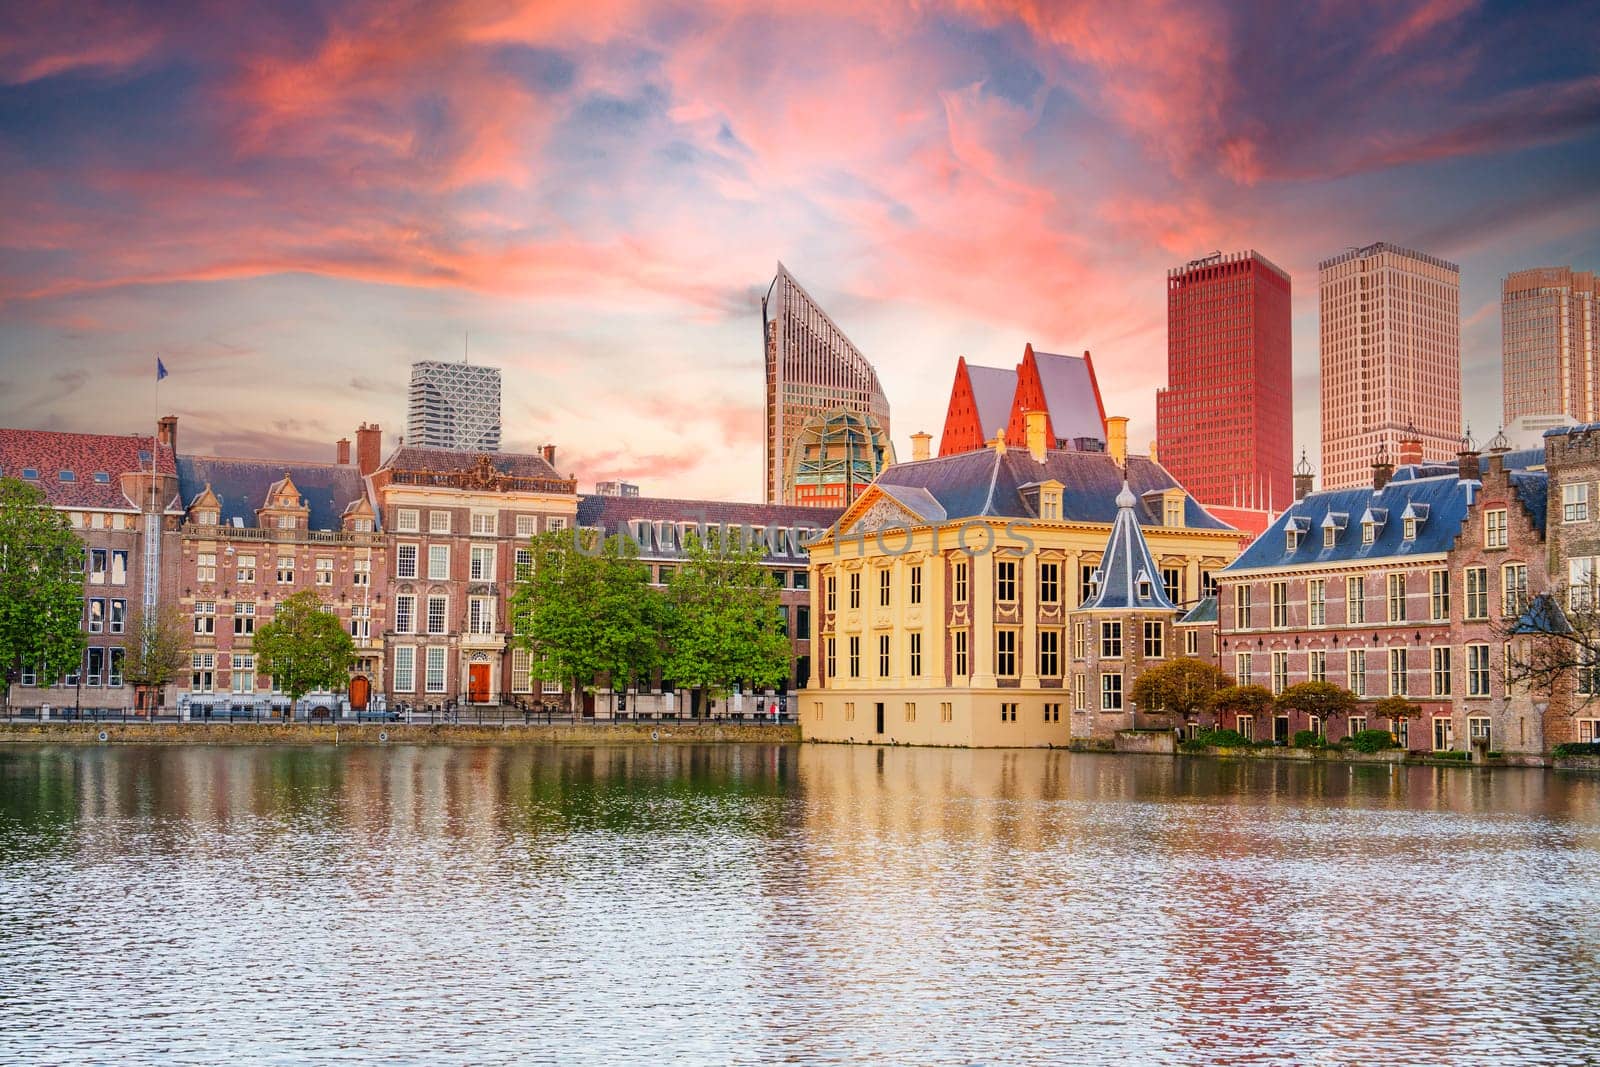 The Hague, Ridderzaal in Binnenhof with the Hofvijver lake at sunset. Meeting place of States General of the Netherlands, the Ministry. Office of the Prime Minister of Netherlands.